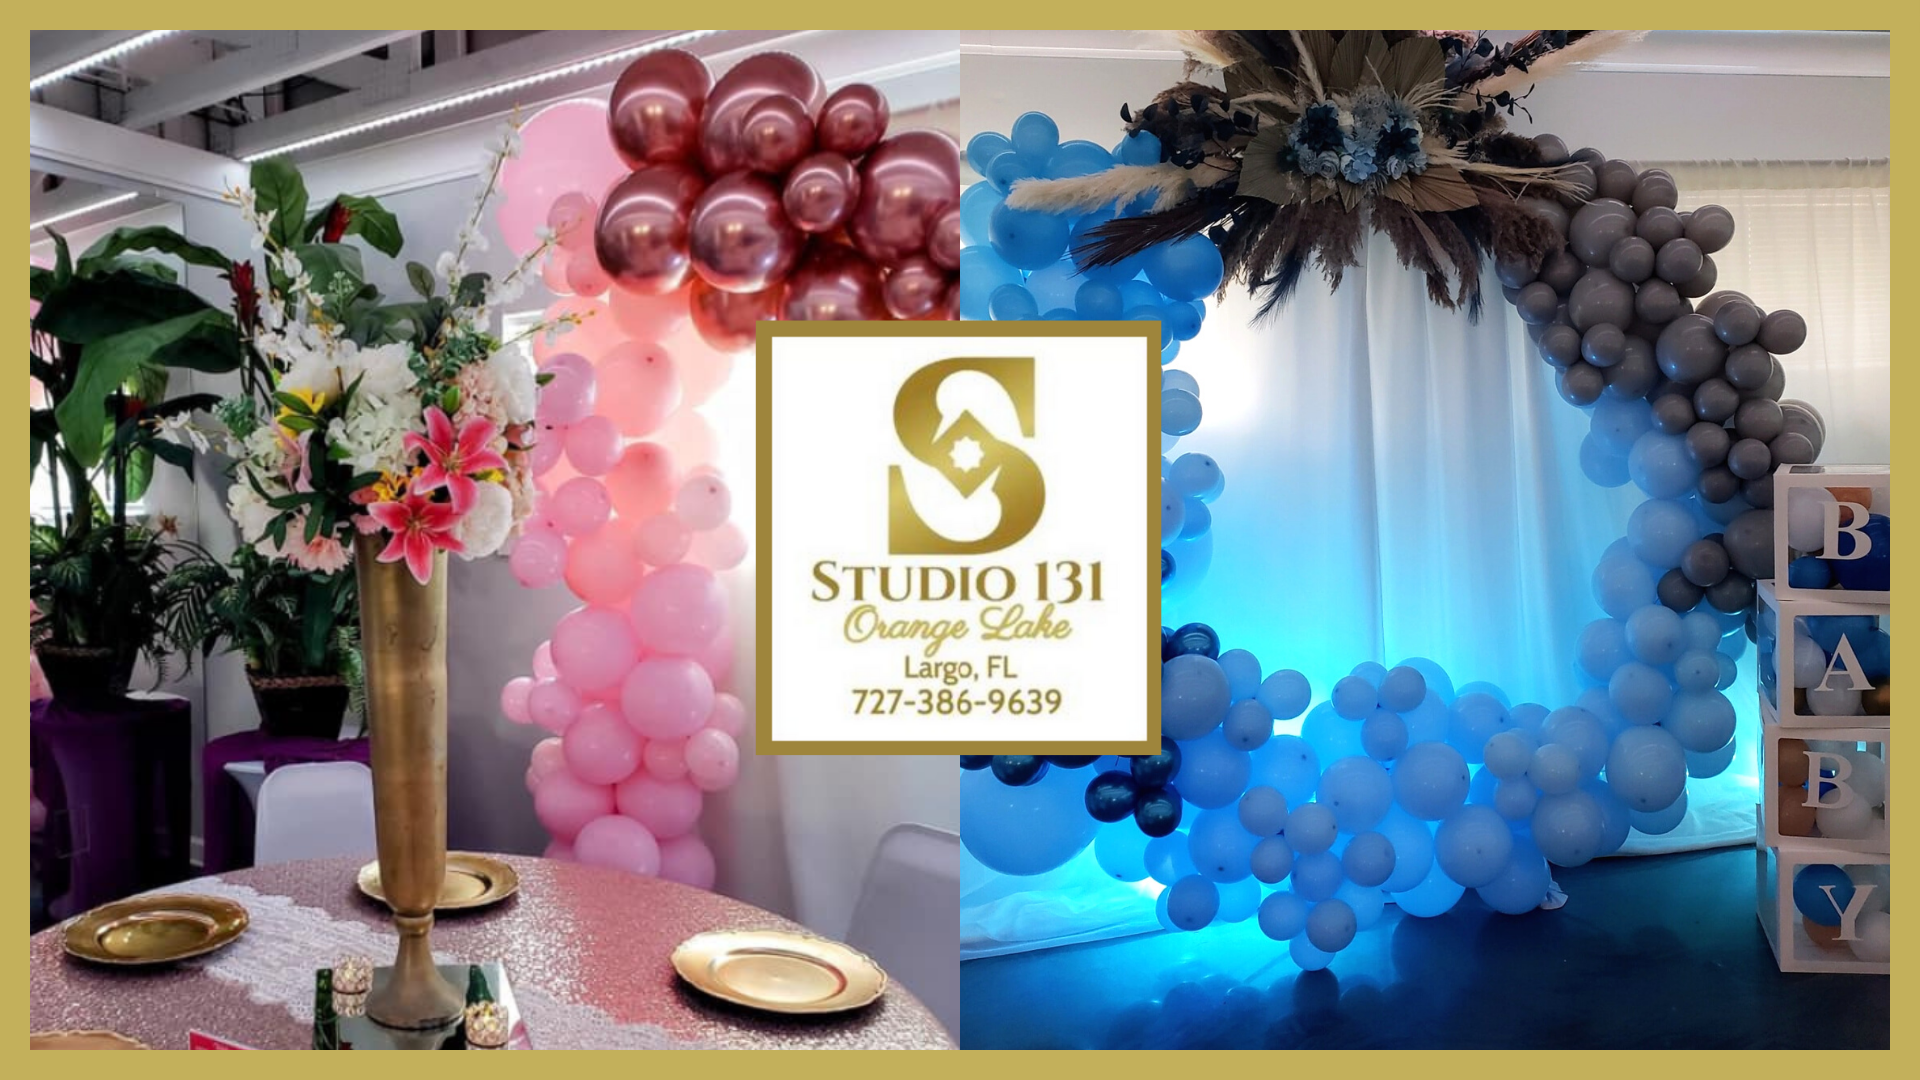 Parents Can Rent This Largo, FL Event Space For Their Baby’s Gender Reveal Party